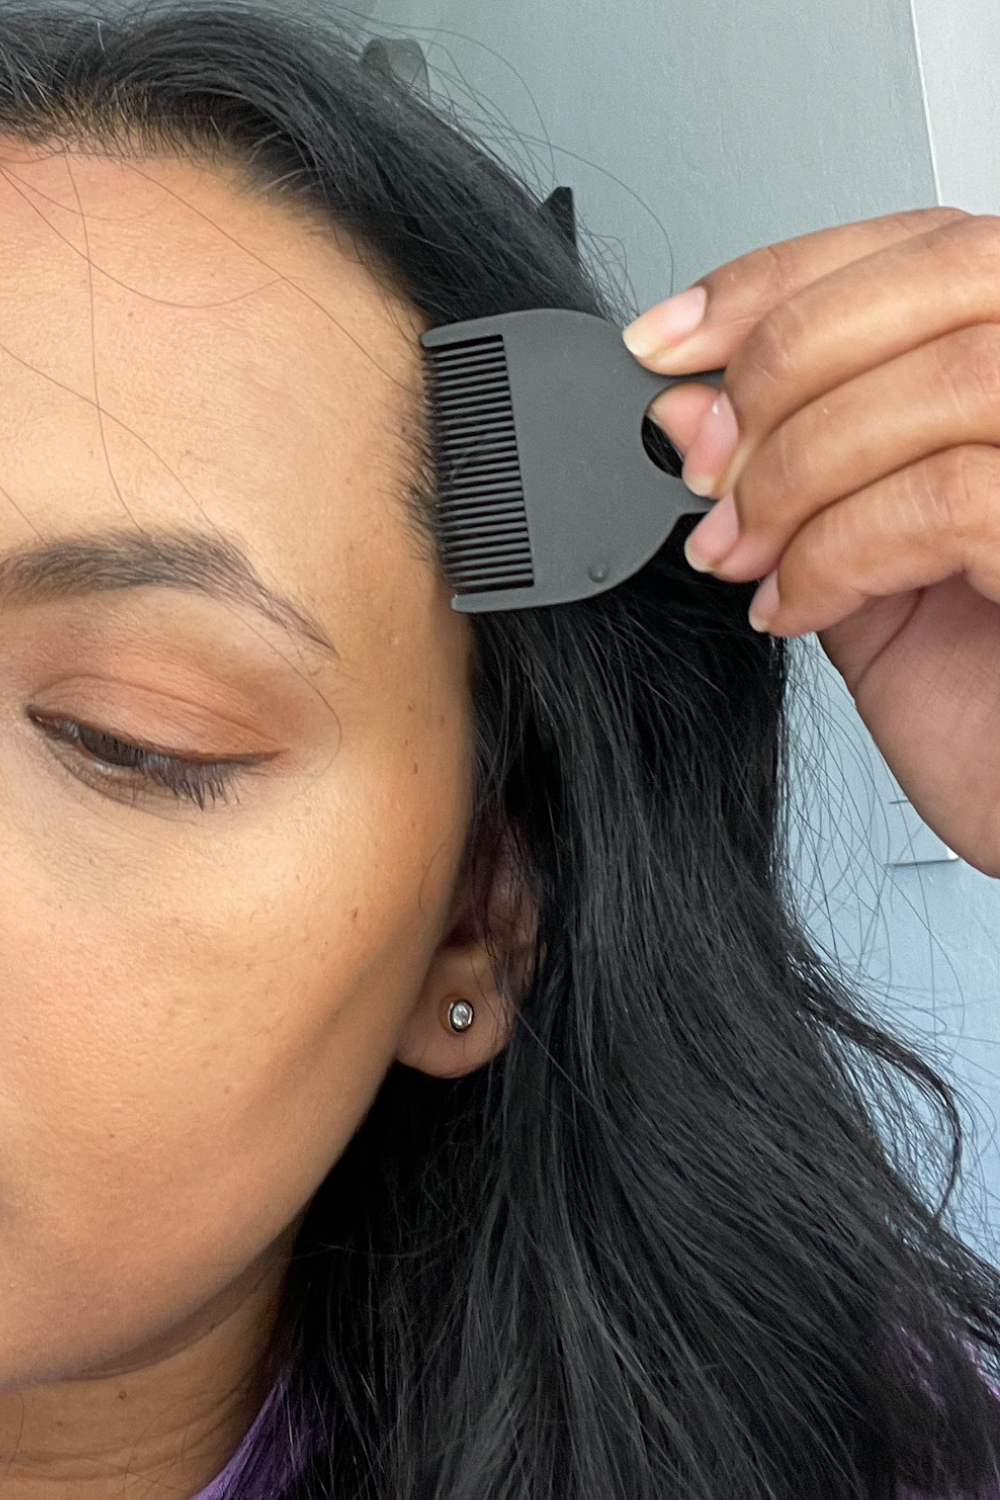 Combing the side hair line